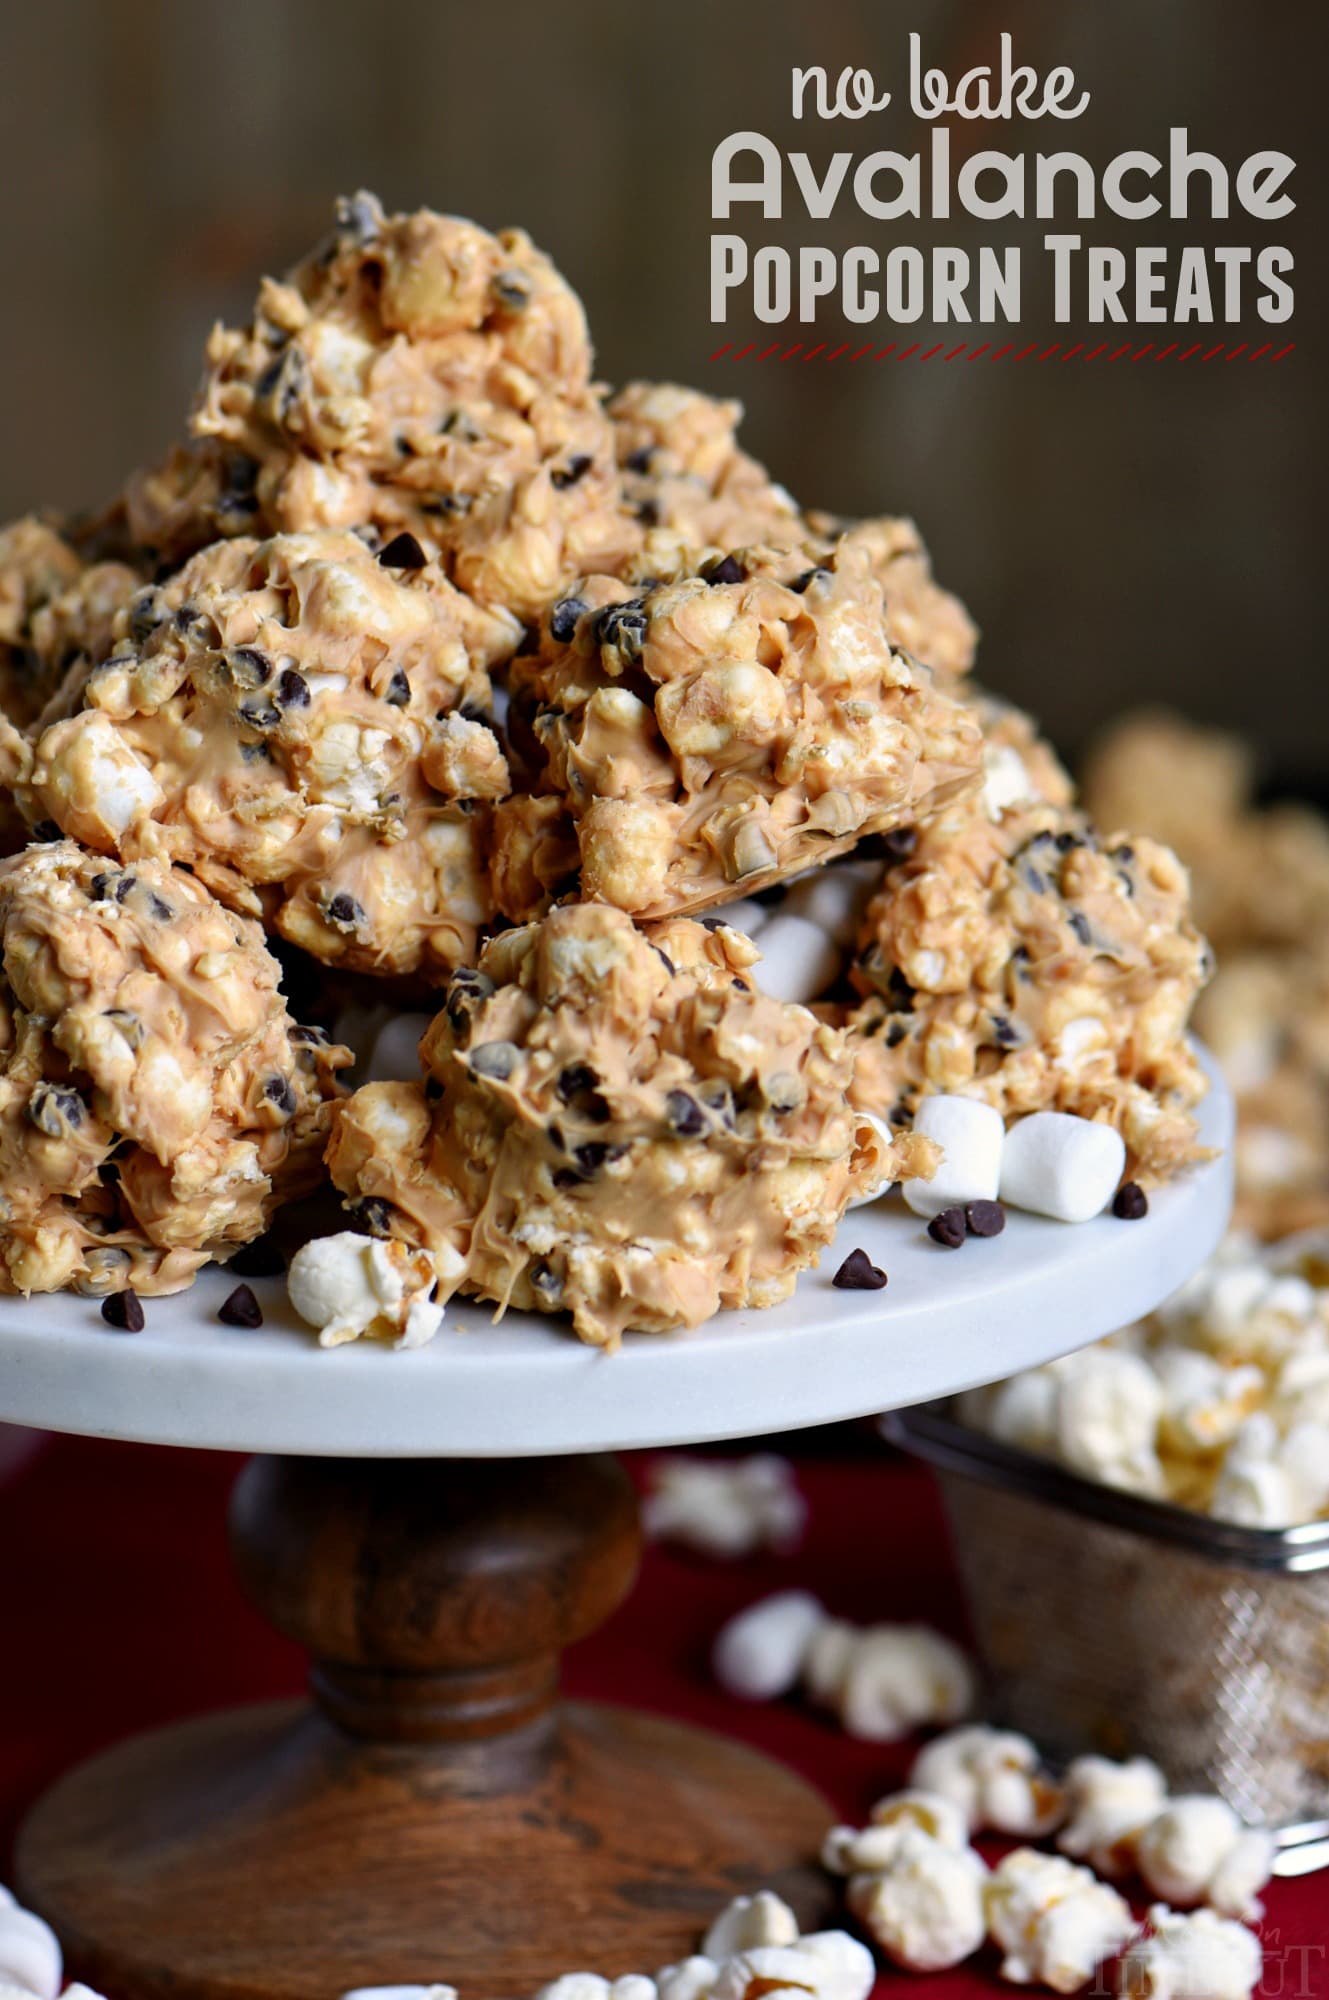 No Bake Avalanche Popcorn Treats are a must-make for the holiday season! Peanut butter, popcorn, marshmallows and chocolate chips combine for an easy, no bake treat that everyone will love! // Mom On Timeout #ad @FritoLay #mingleinabox #sweepstakes